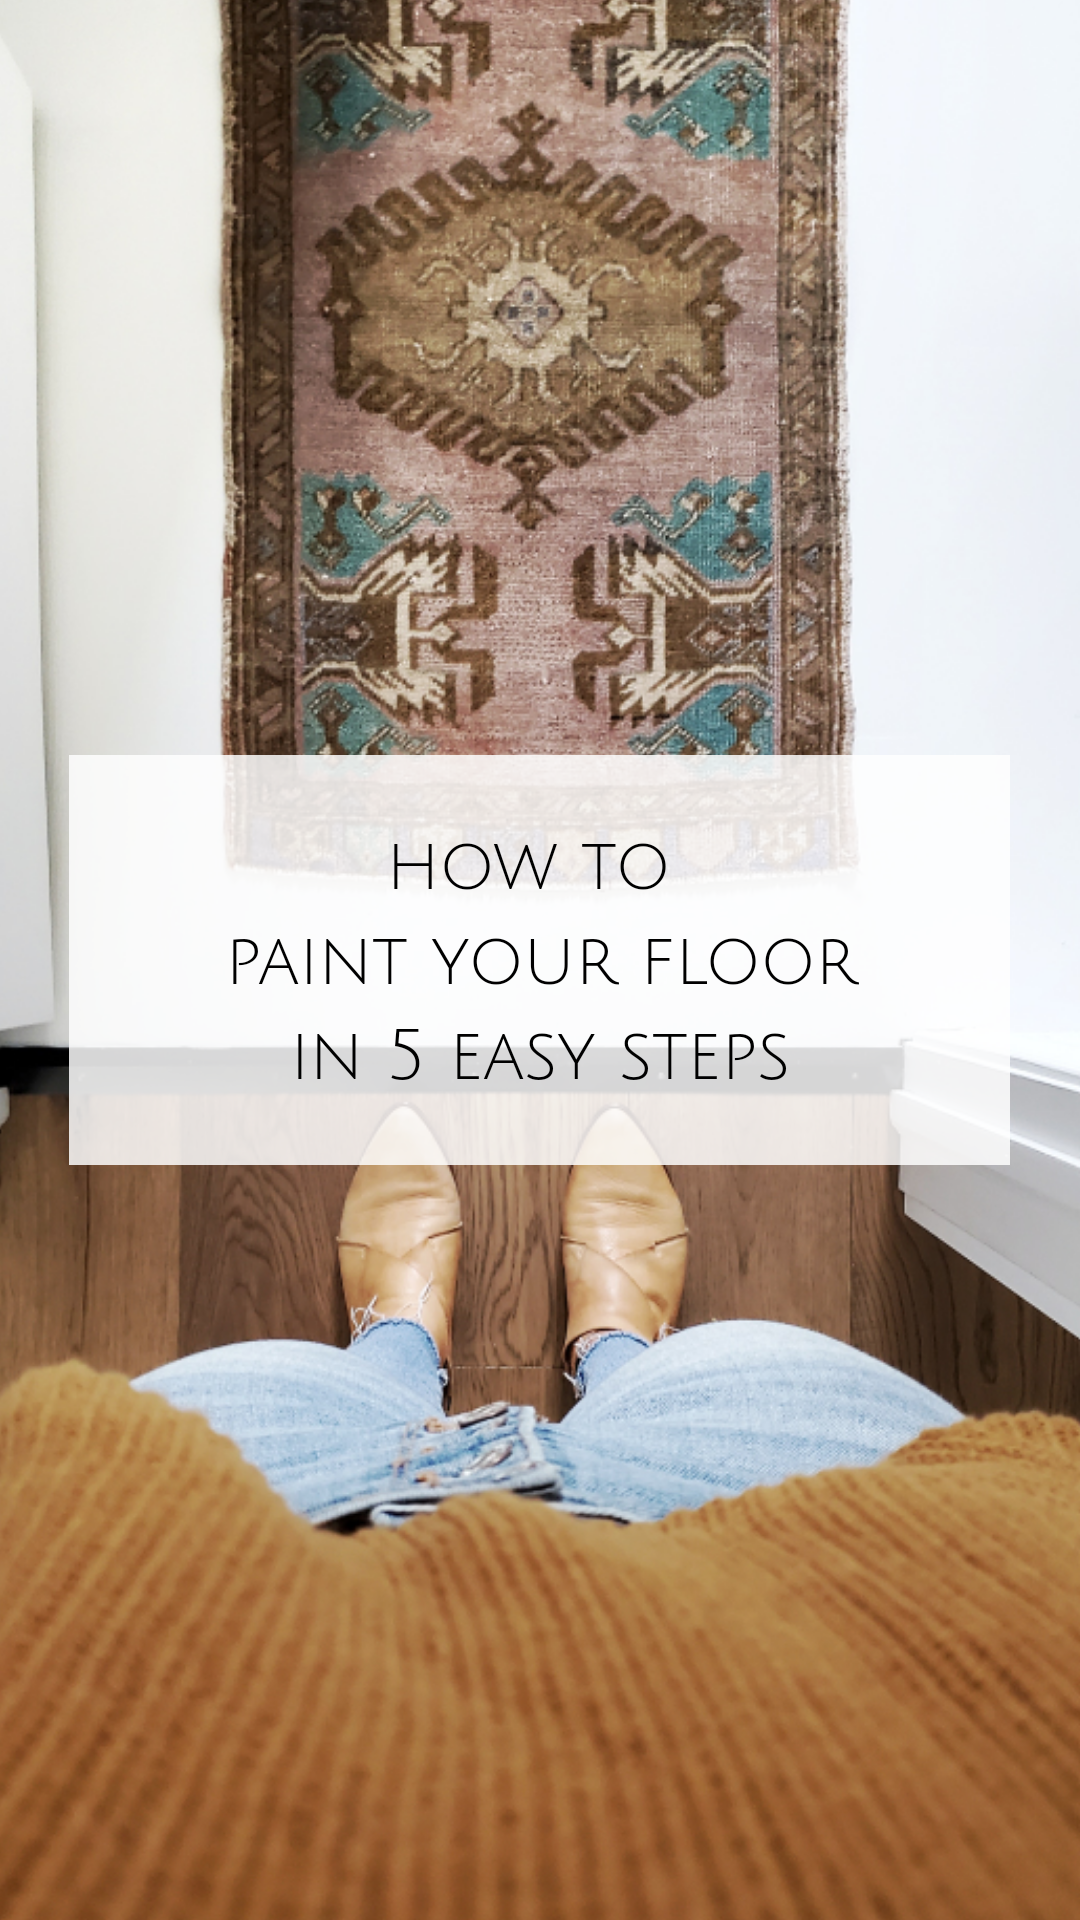 How to paint your floors in 5 easy steps